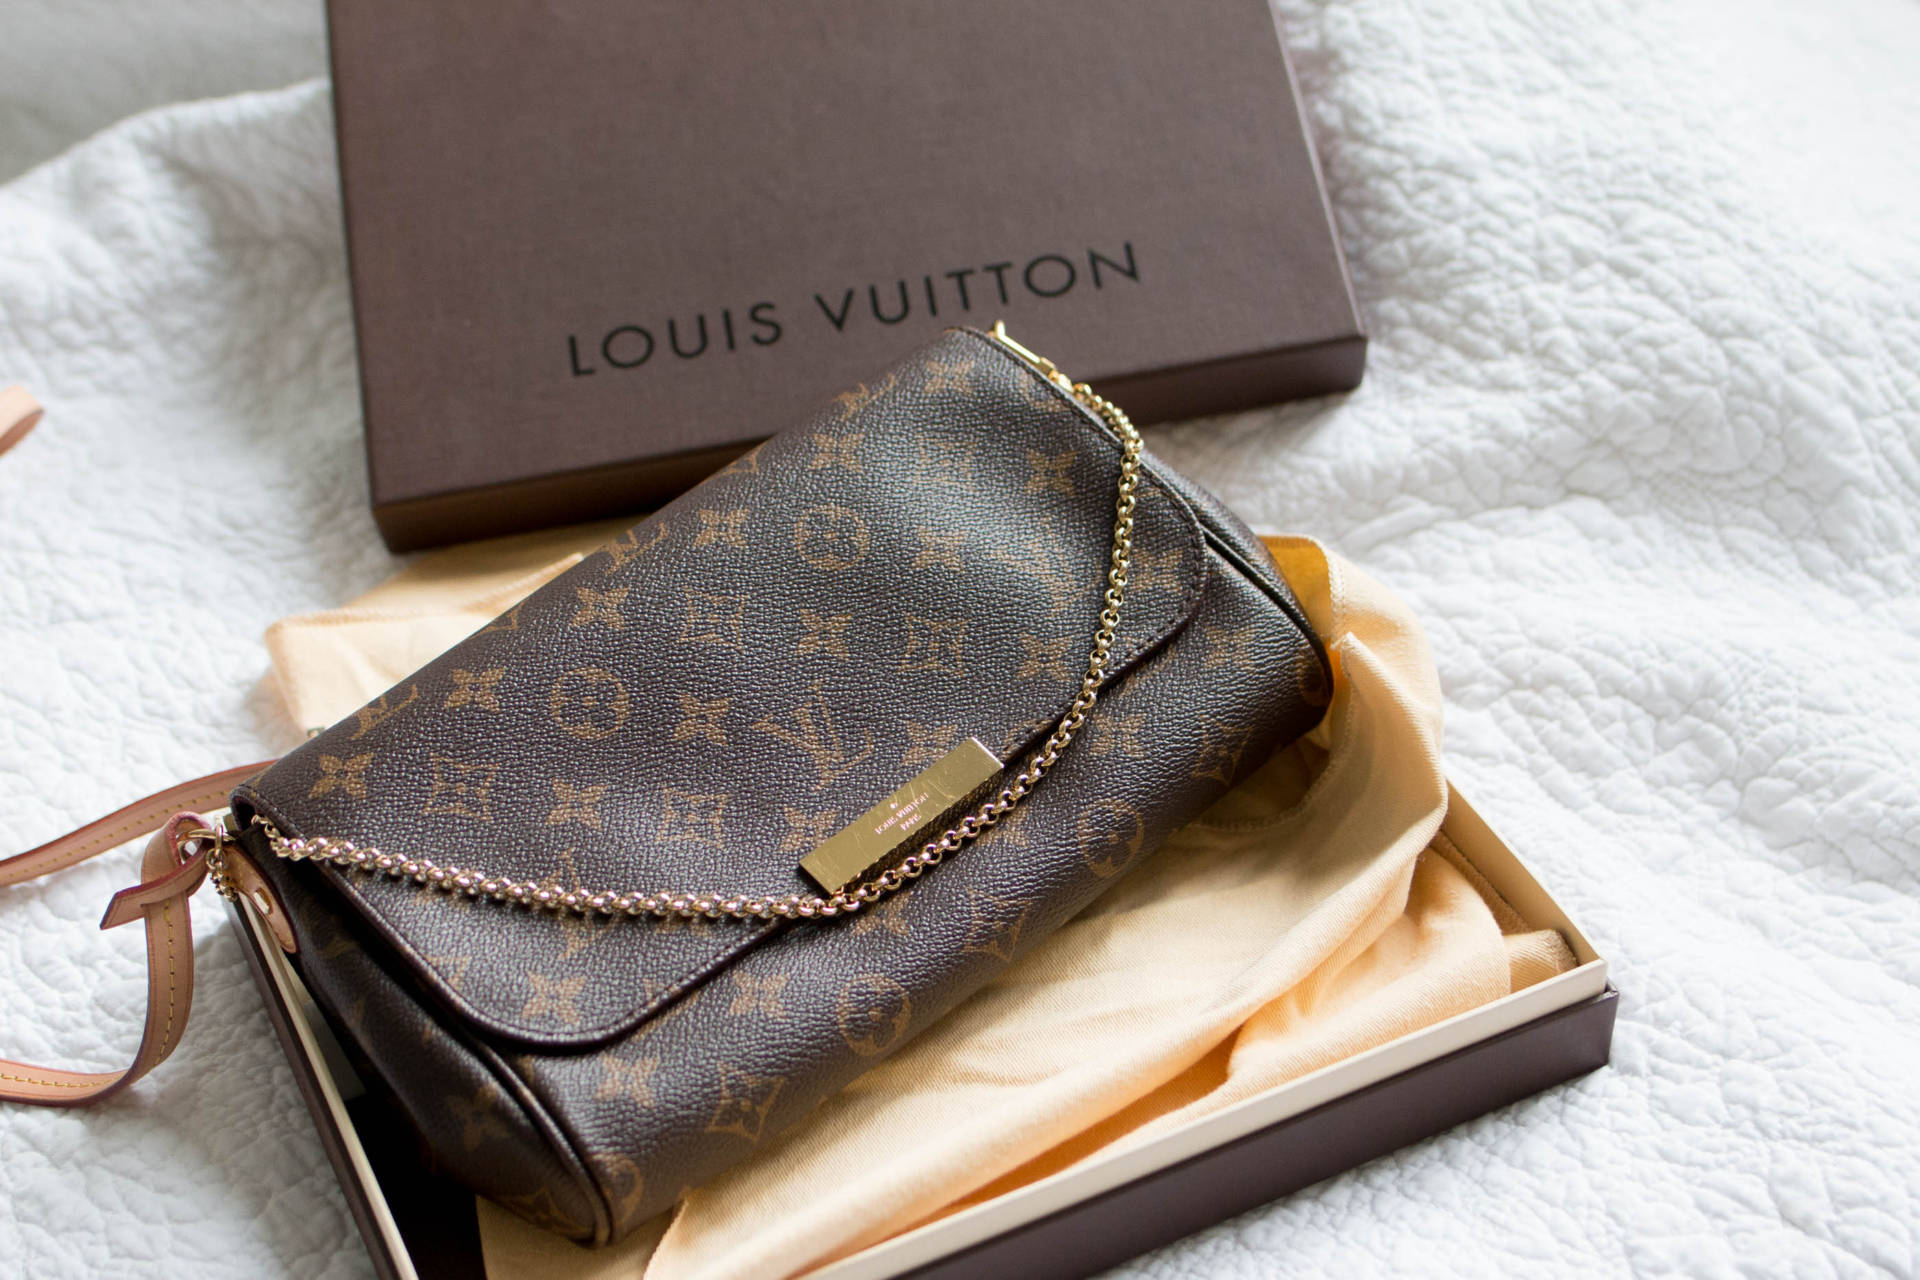 Louis Vuitton Favorite Mm Discontinued | Confederated Tribes of the Umatilla Indian Reservation